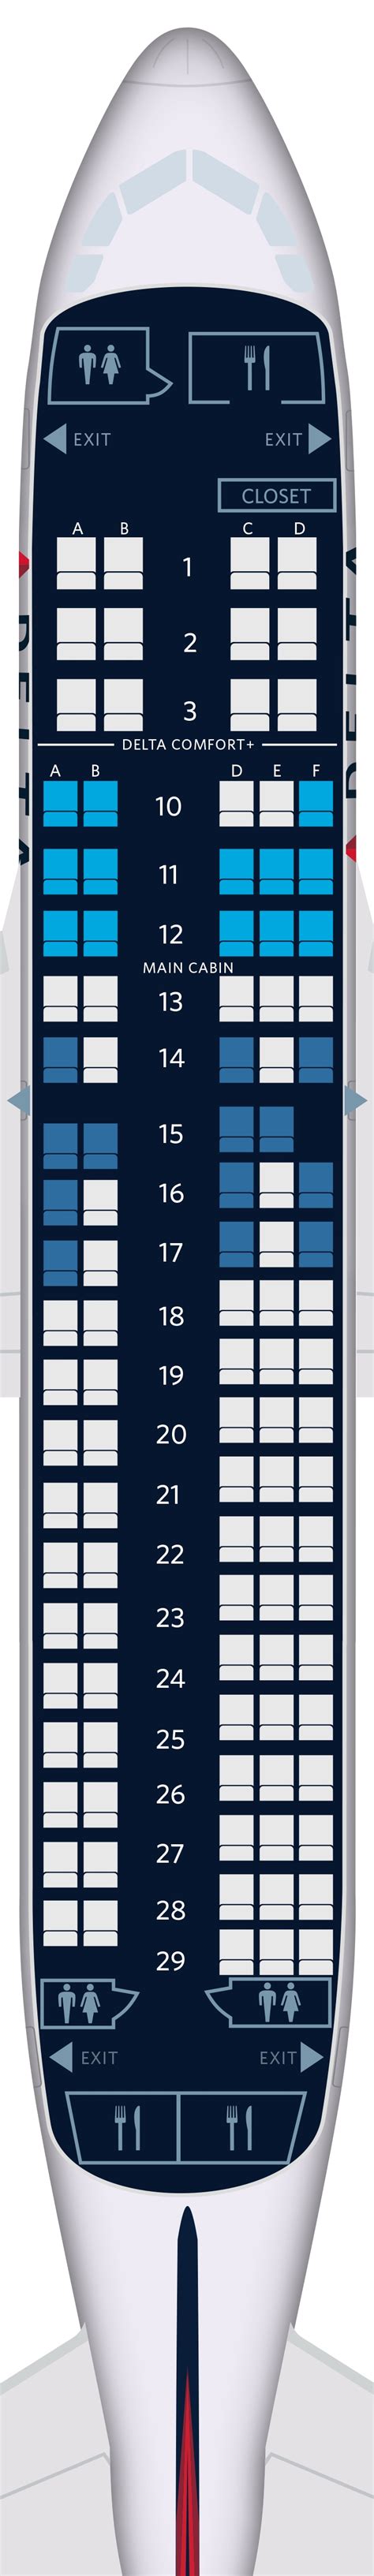 Airbus A220 100 Aircraft Seat Maps Specs And Amenities Delta Air Lines